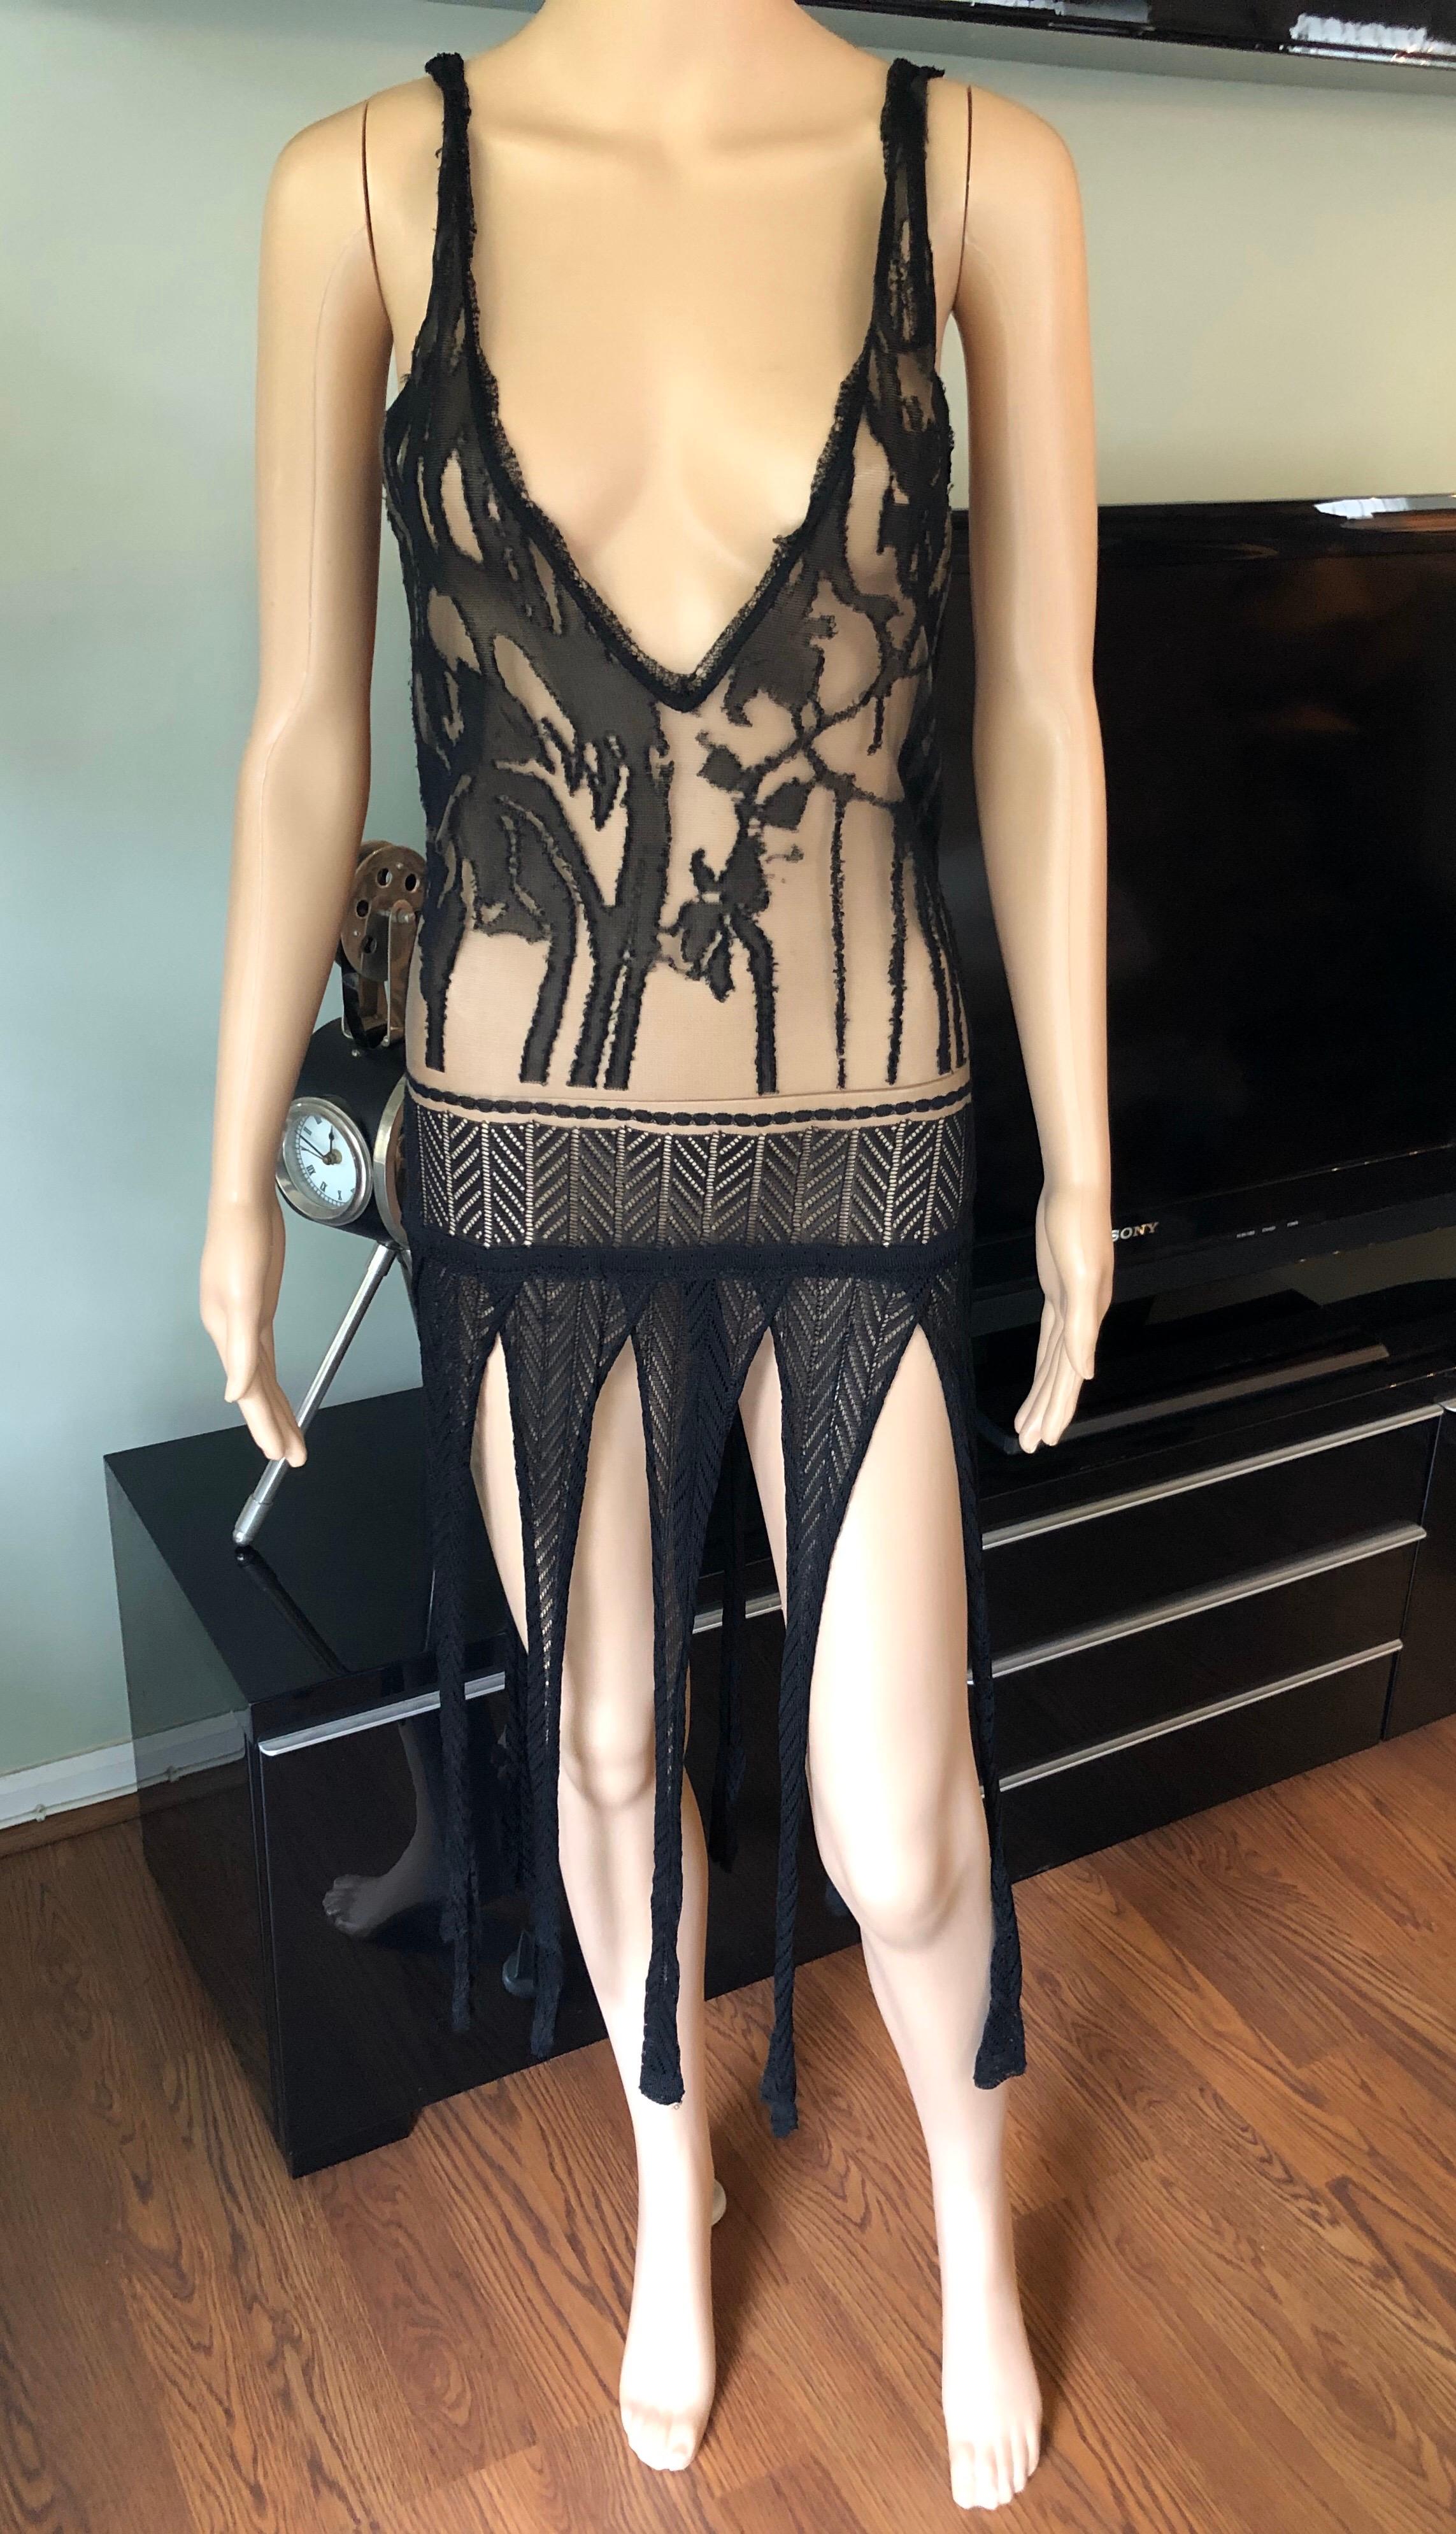 Christian Lacroix Vintage Semi-Sheer Crochet Mesh Knit Fringed Black Dress In Good Condition For Sale In Naples, FL